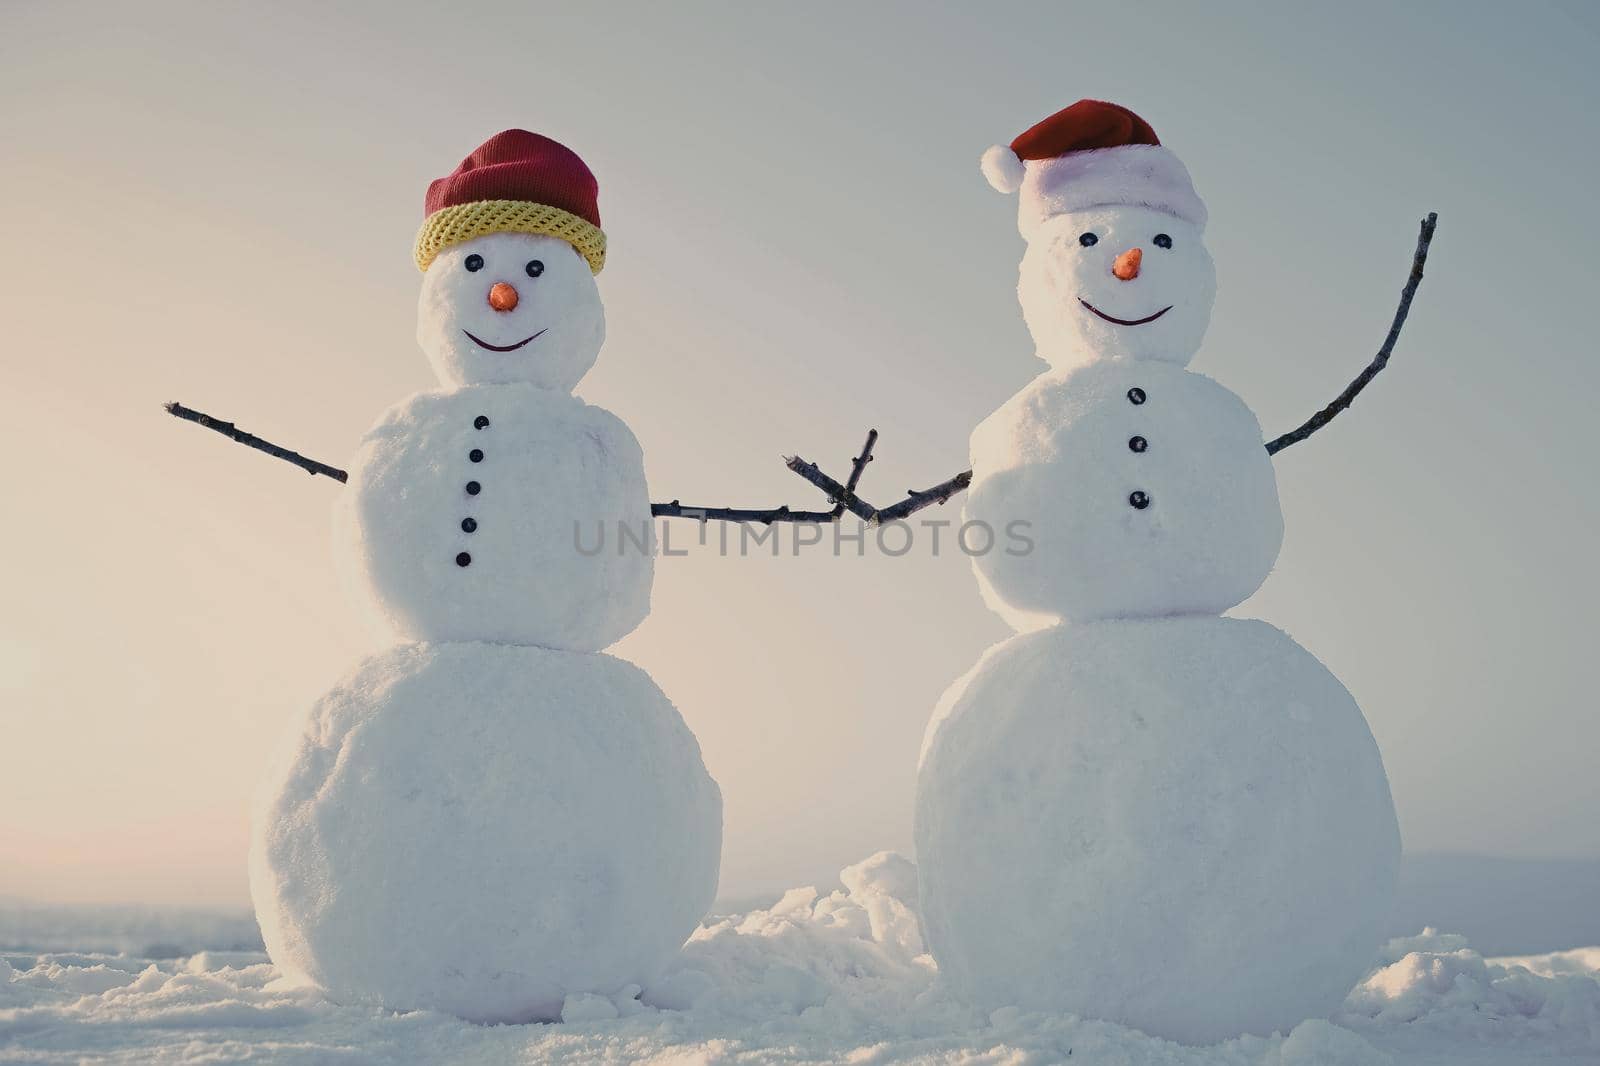 Couple Snowman in winter outdoor. New year snowmen from snow in santa hat.